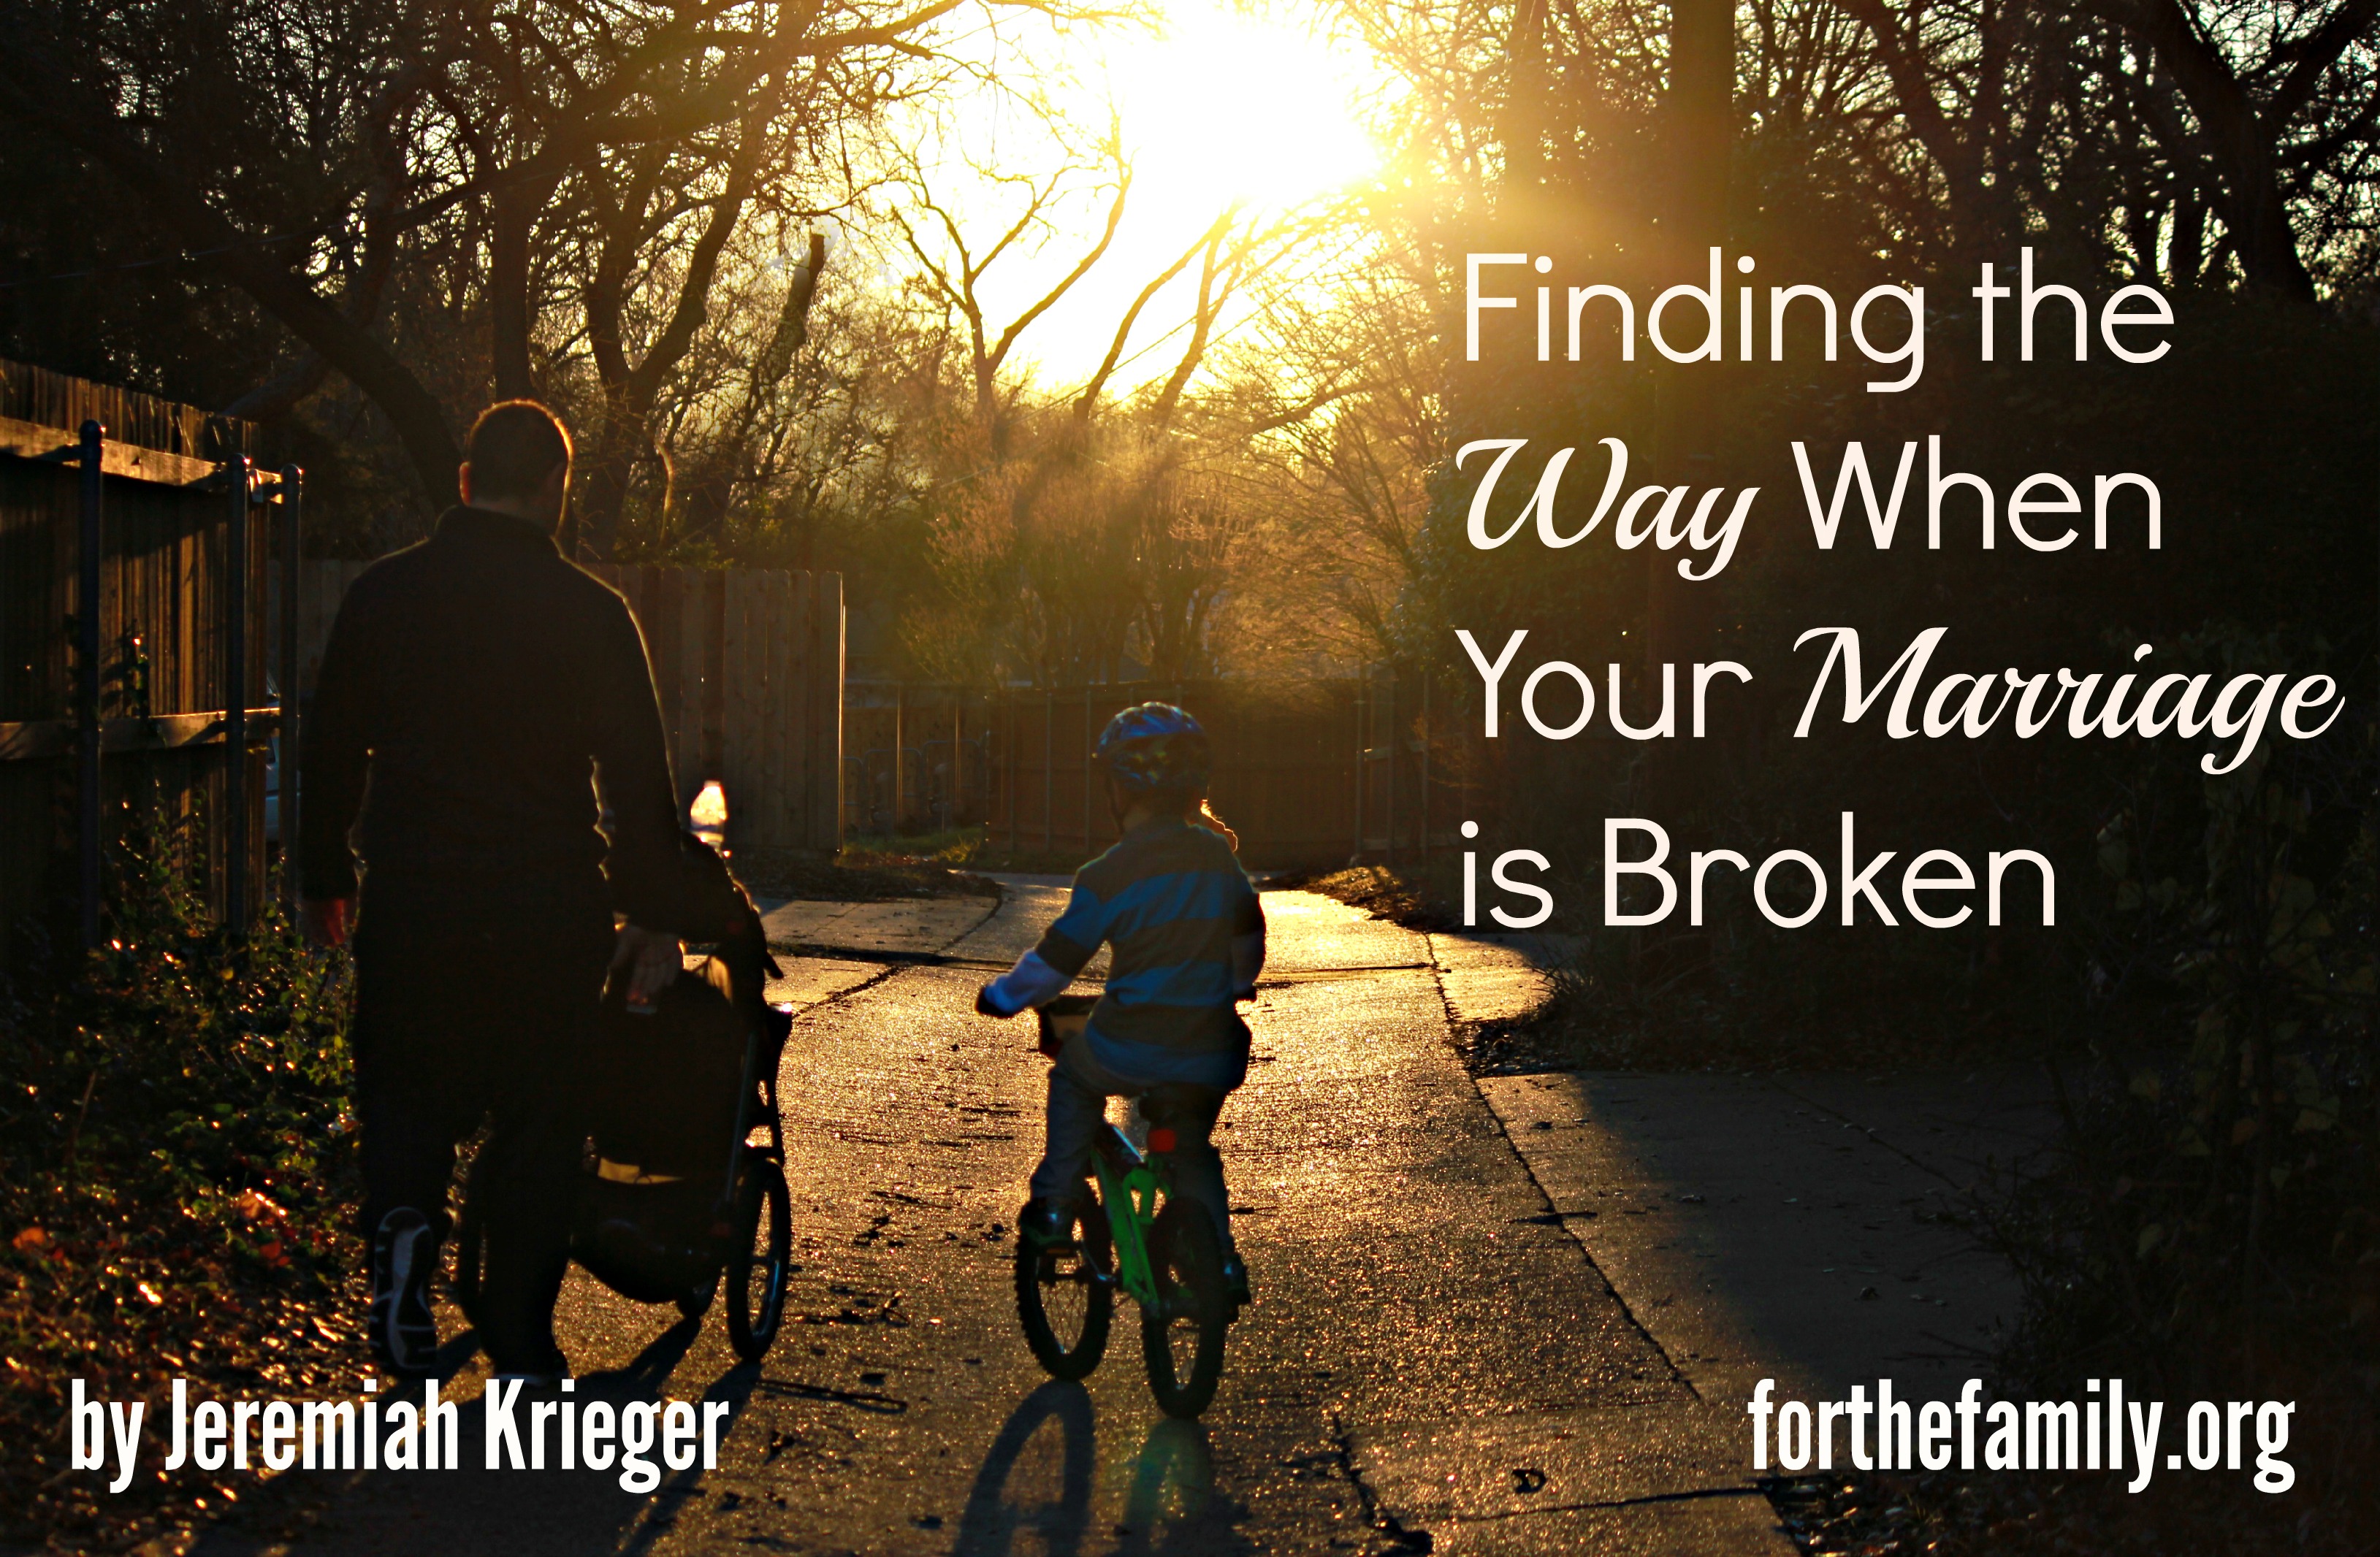 Finding the Way When Your Marriage is Broken